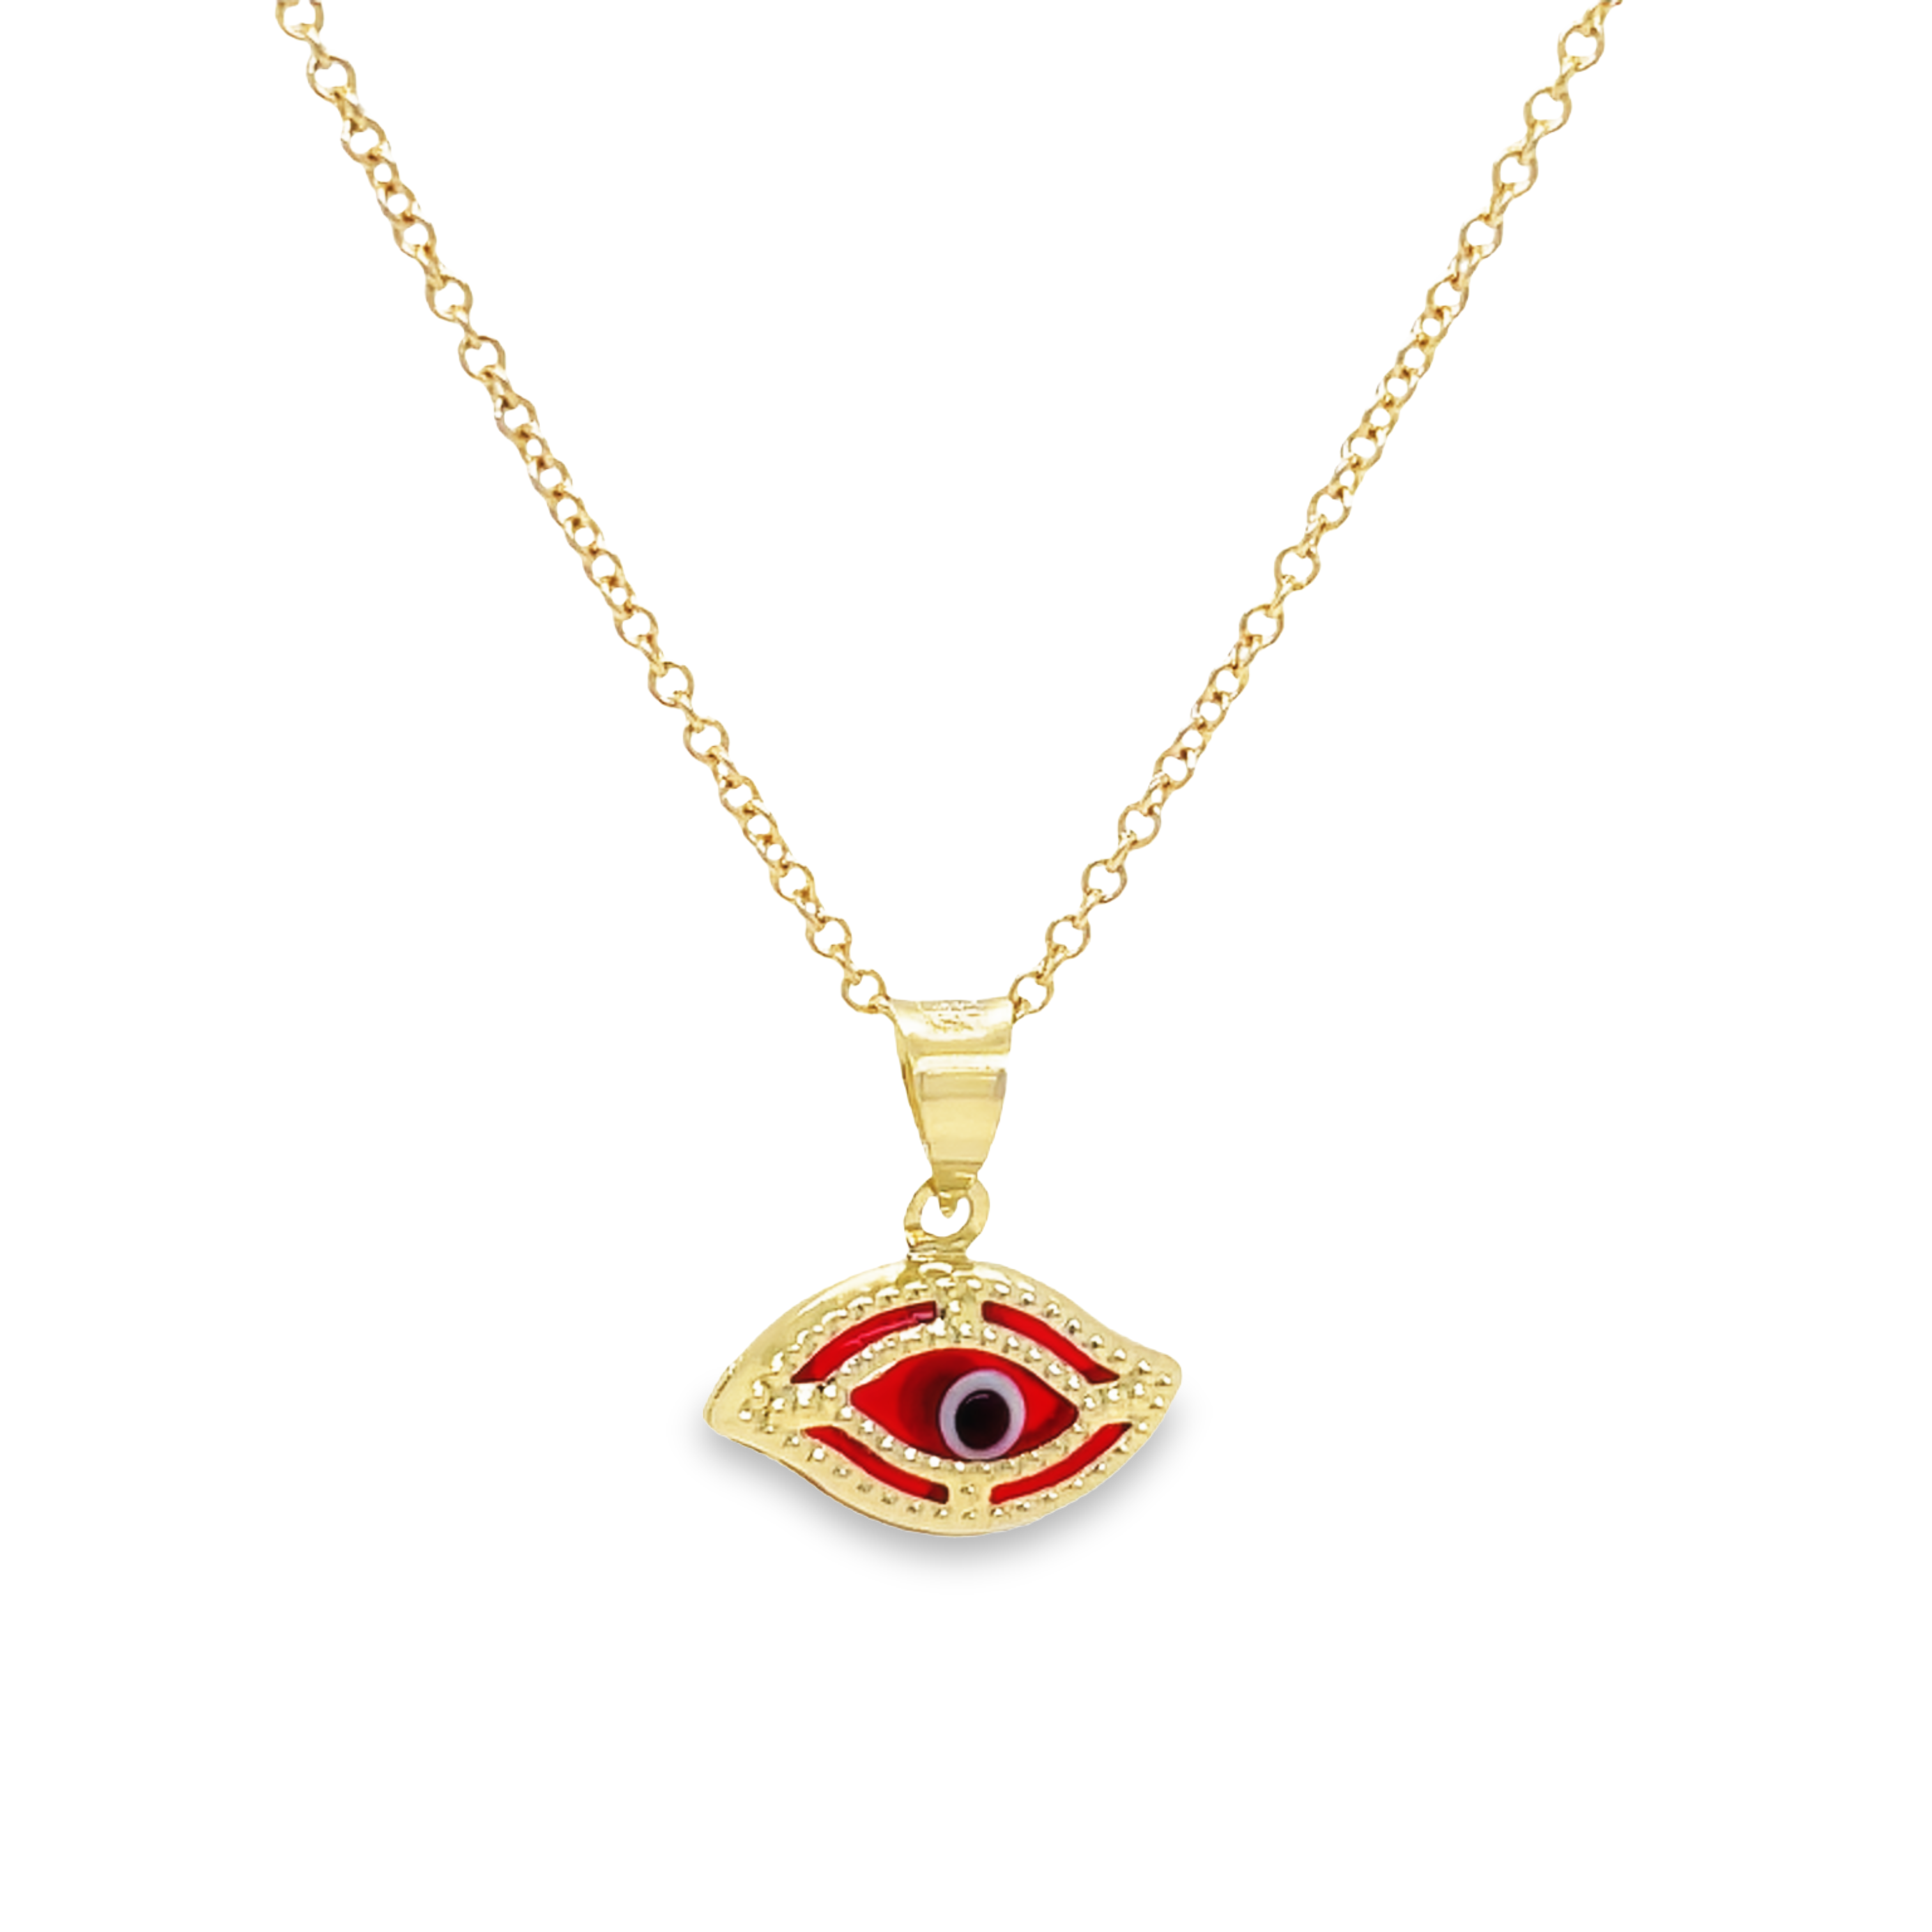 This beautiful 14k yellow gold pendant necklace is crafted with a classic evil eye design. The enamel colors are expertly laid out to be vibrant and eye-catching, sure to add a subtle yet stylish statement to any look.   Chain option 16" ($190)   